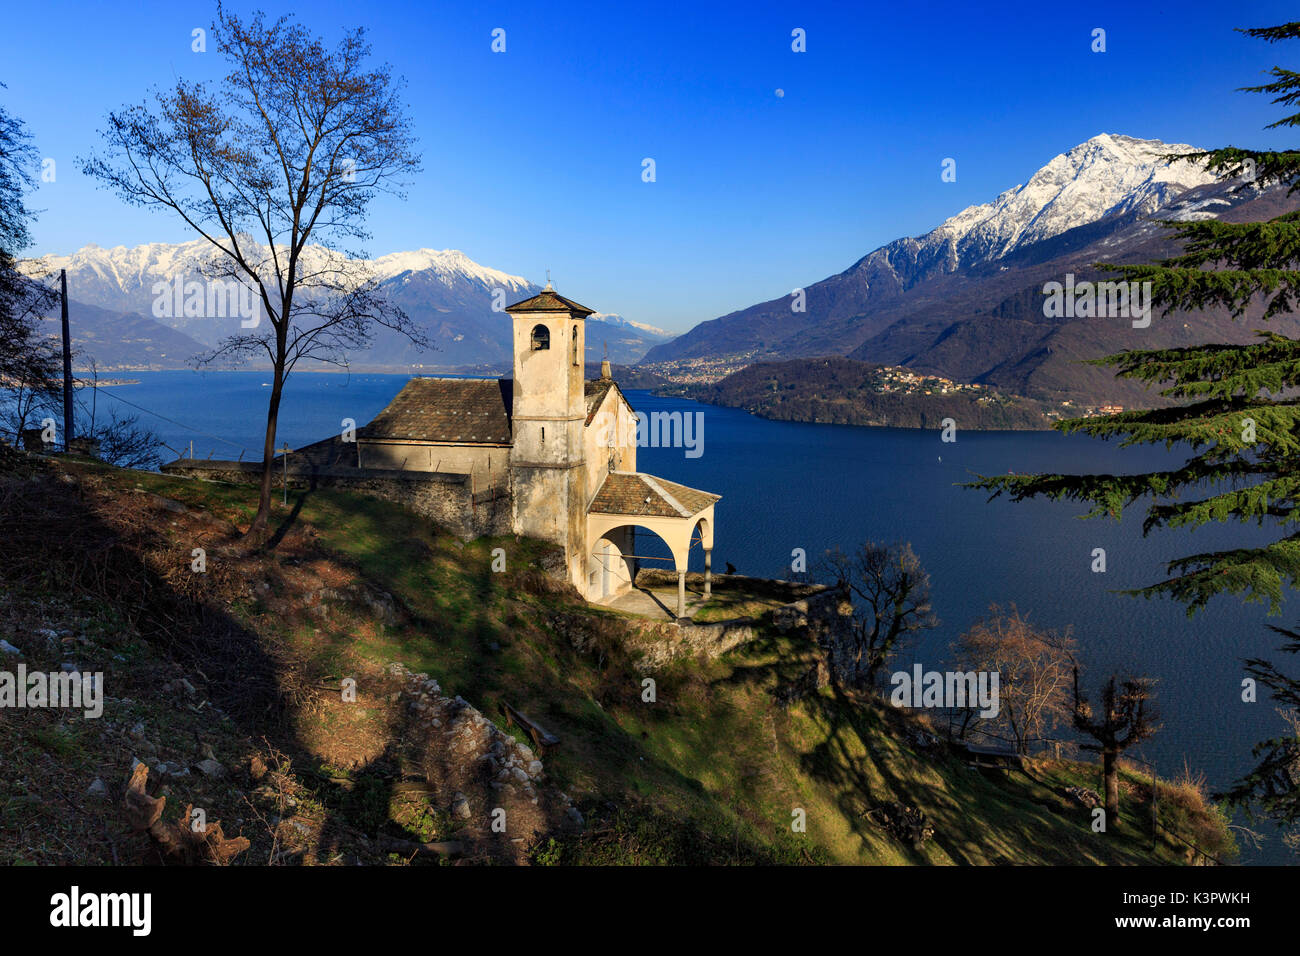 Chiesa di Sant'Eufemia, a little church over Musso surrounded by Como lake scenery, Province of Como, Lombardy, Italy Stock Photo